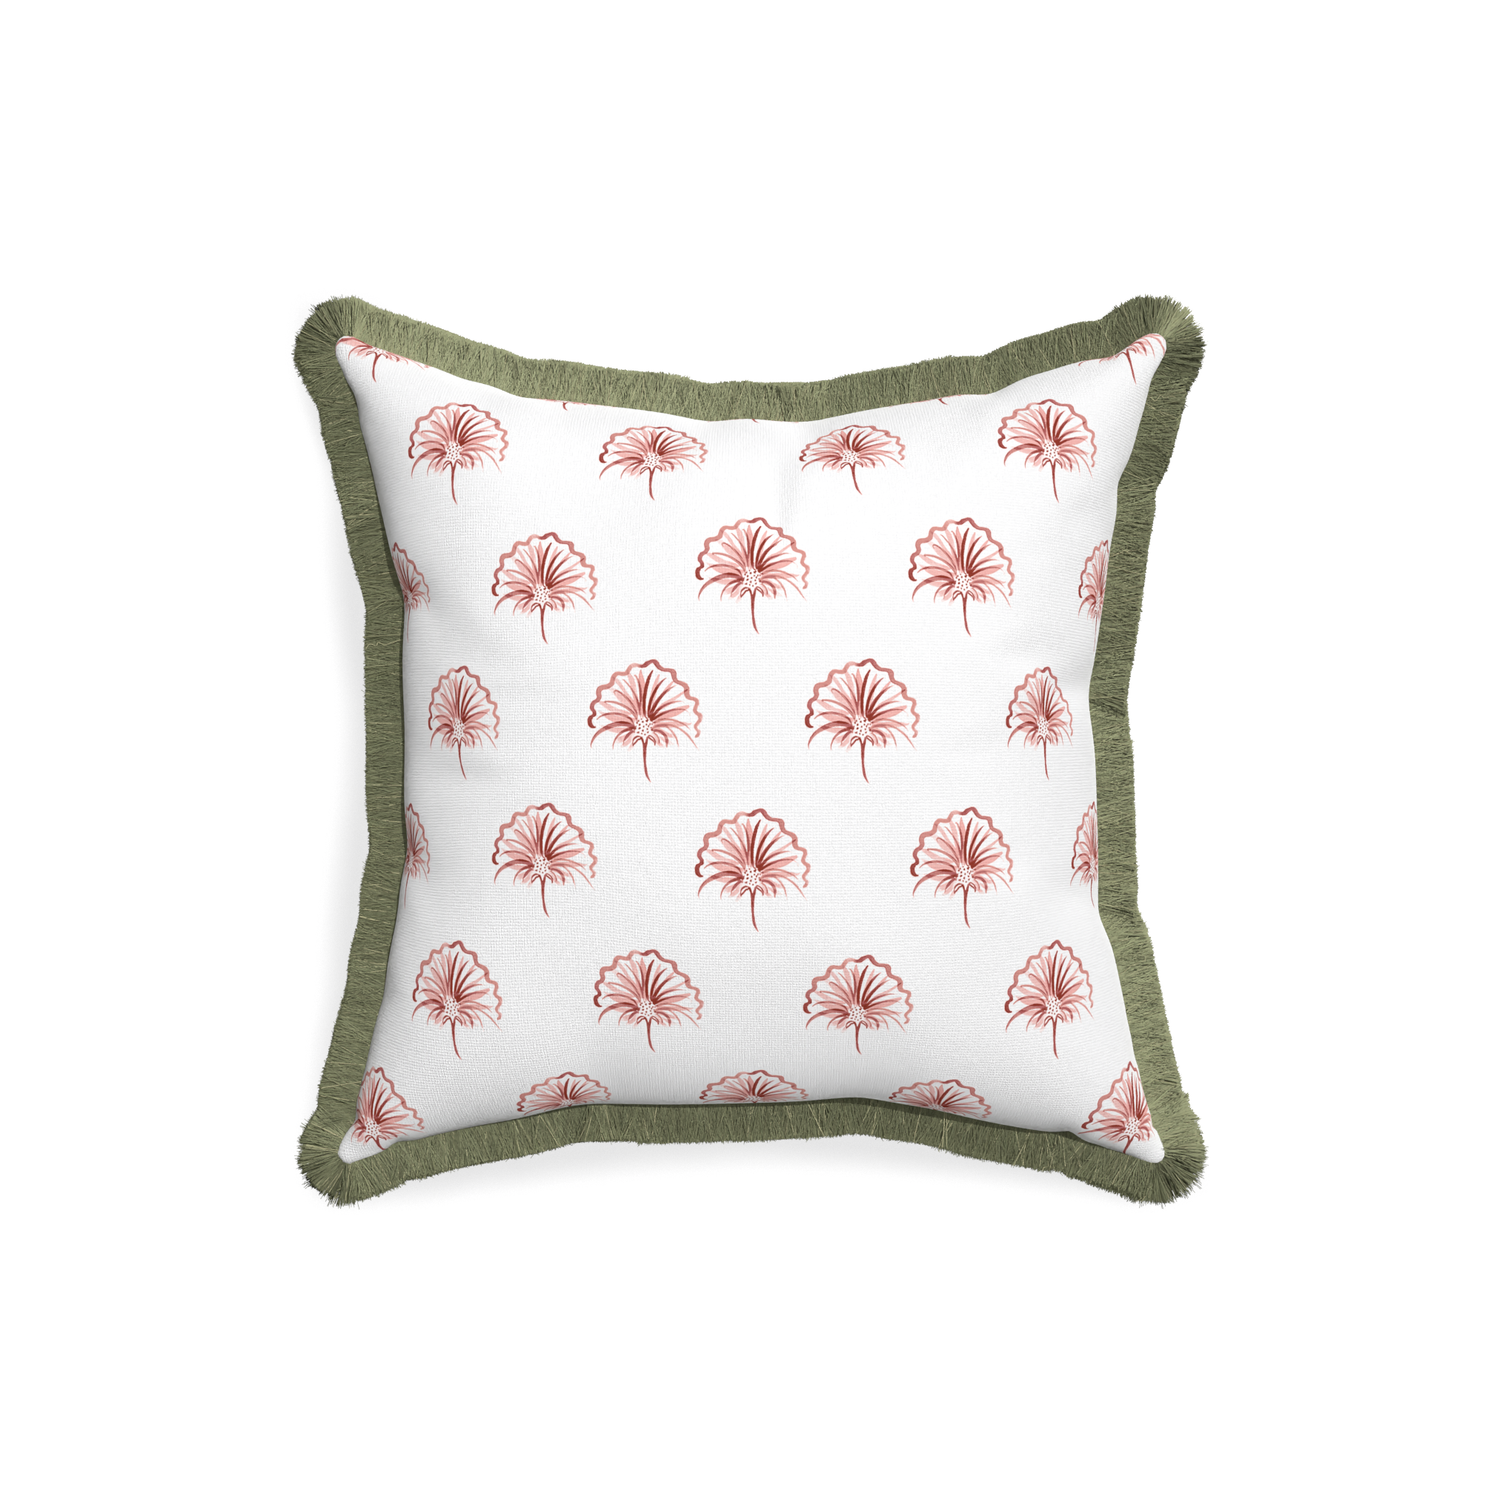 18-square penelope rose custom floral pinkpillow with sage fringe on white background